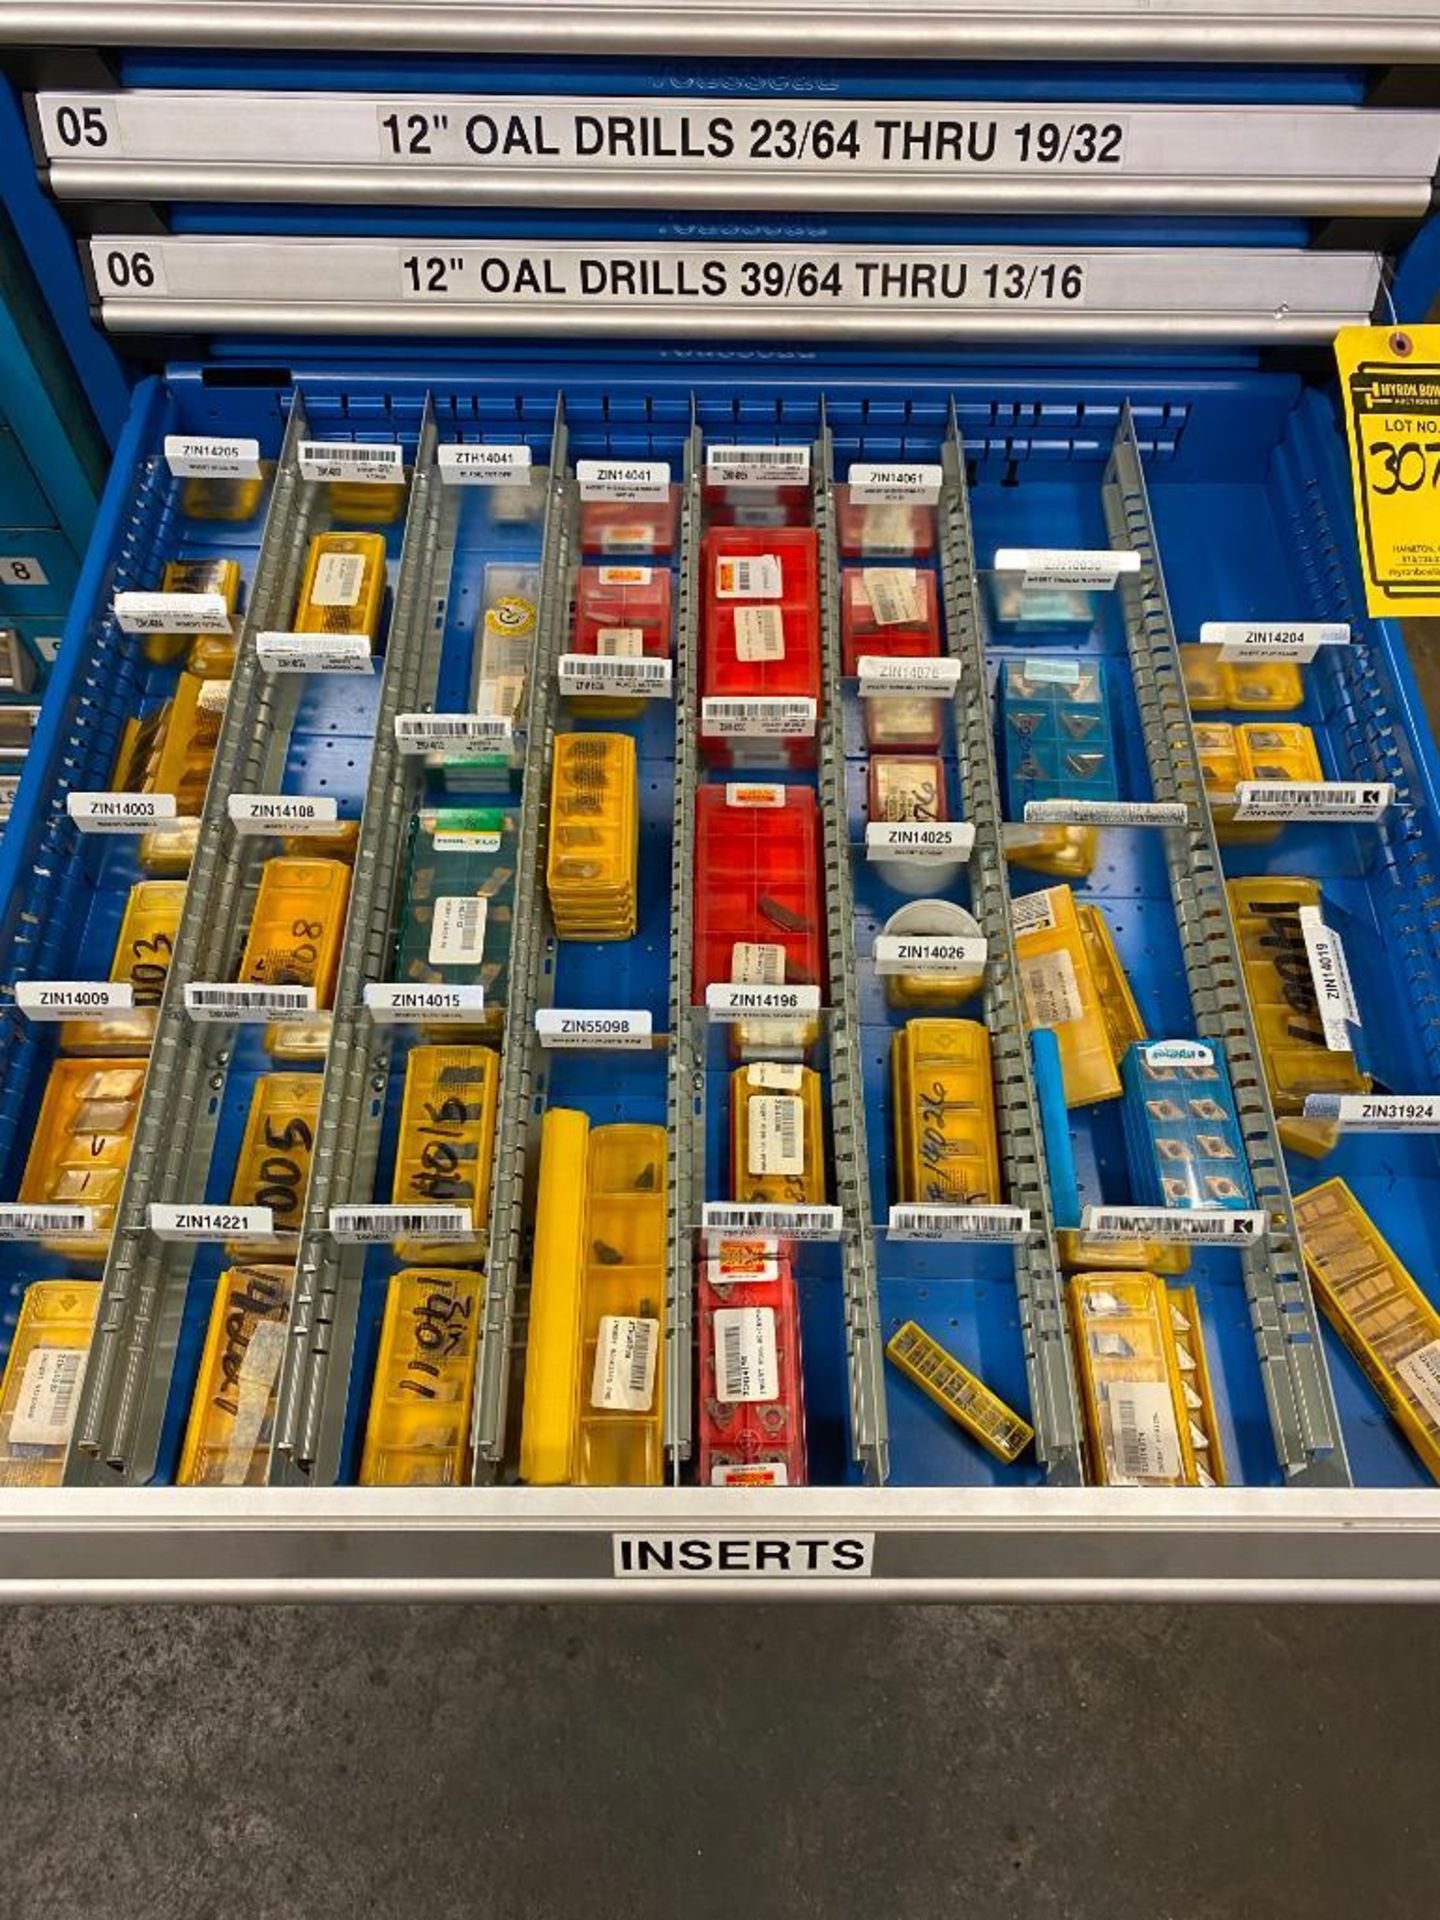 VIDMAR CABINET AND CONTENTS OF ASSORTED SPOT DRILLS, CENTER DRILLS, OAL DRILLS AND INSERTS - Image 7 of 15